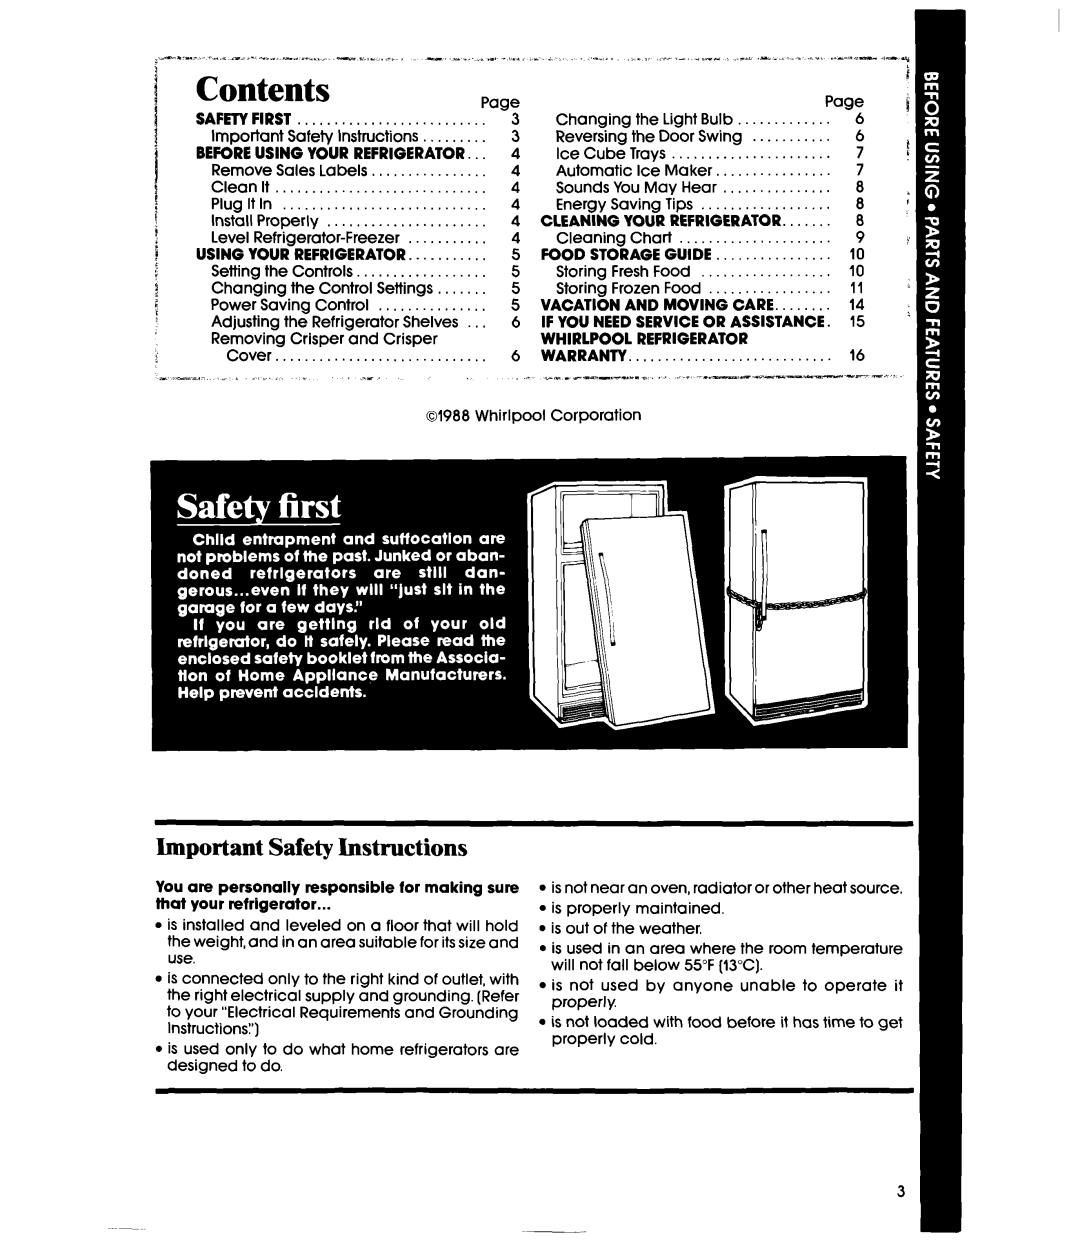 Whirlpool ETl4JM manual Contents, Important Safety Instructions 